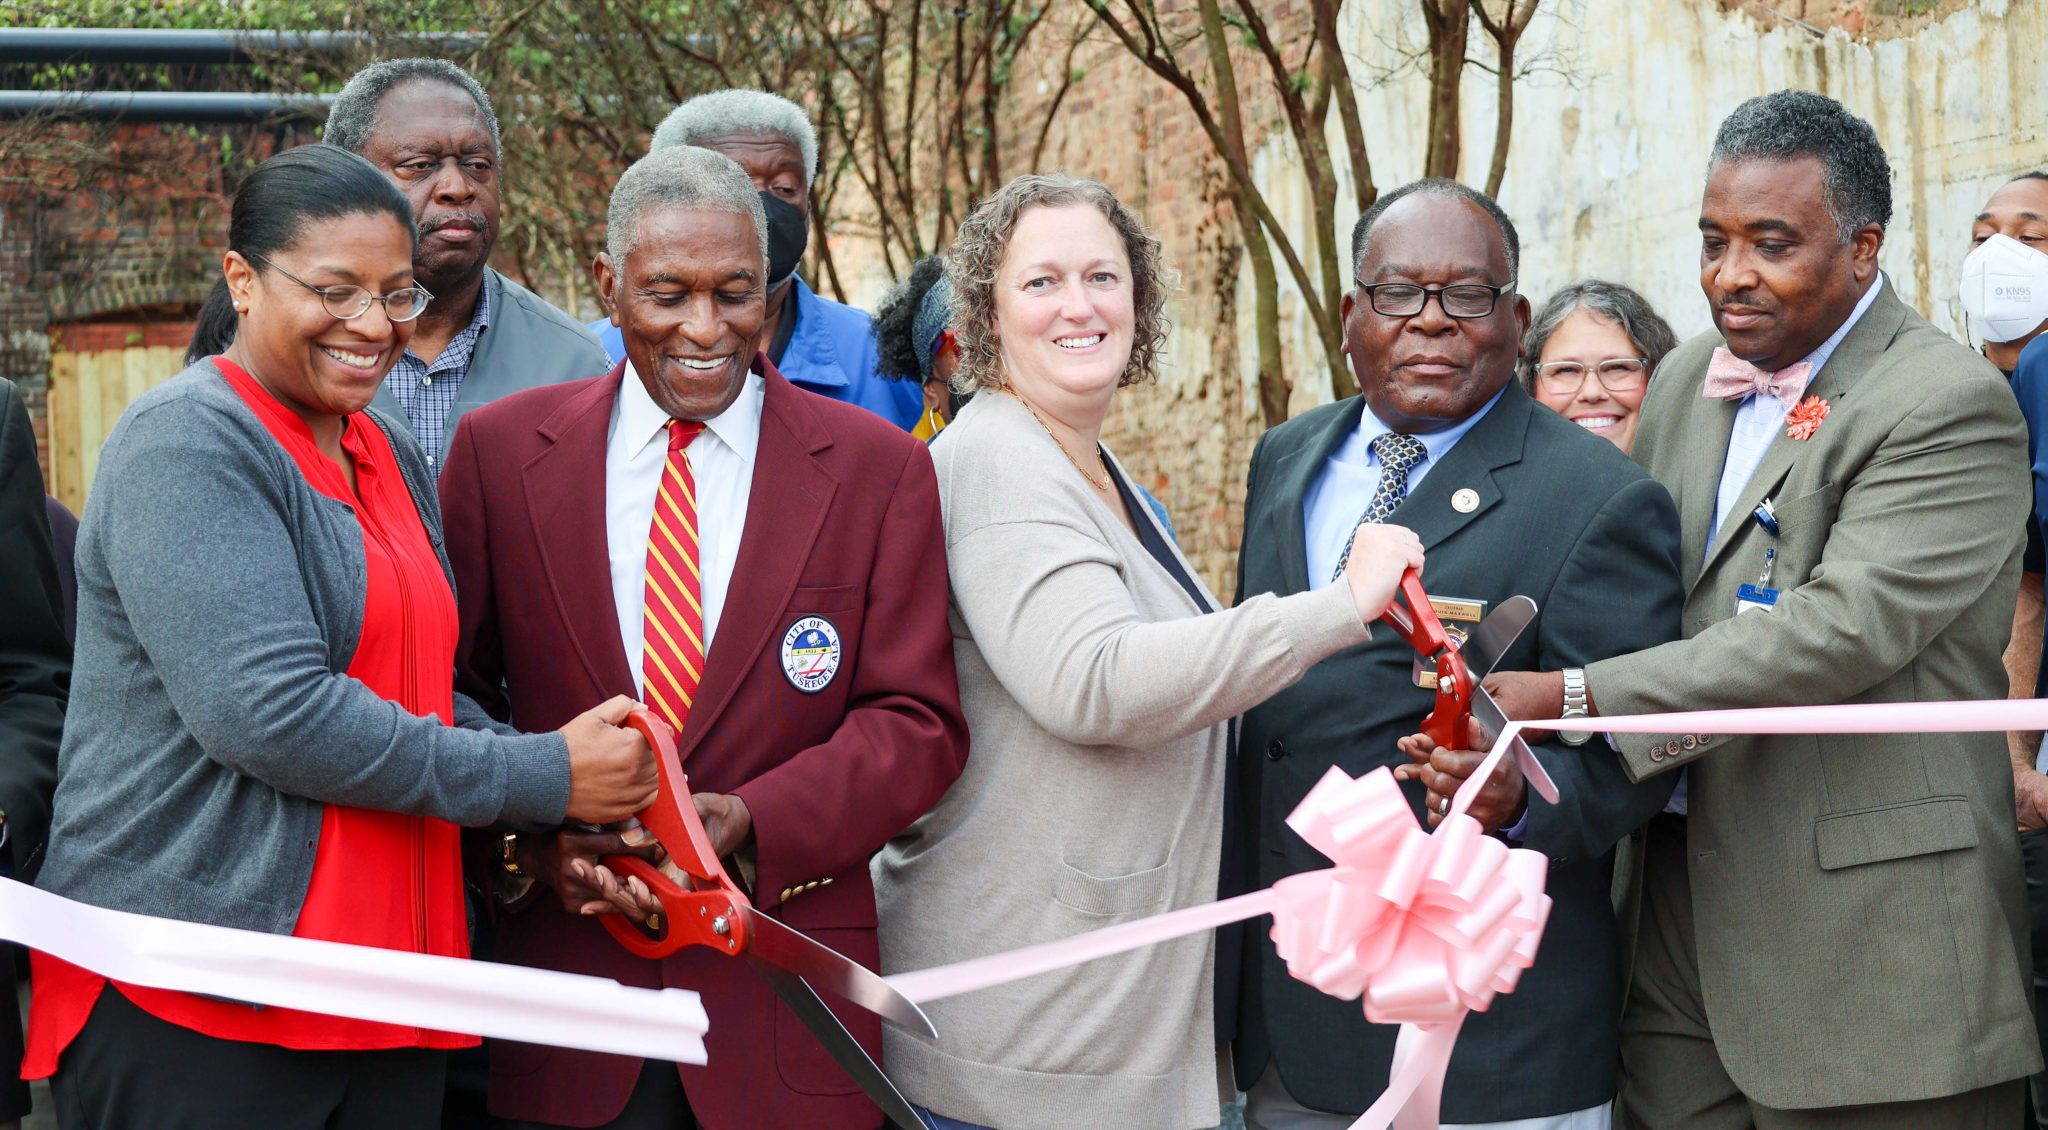 ALProHealth Funds Pocket Park Dedicated to Civil Rights Activist